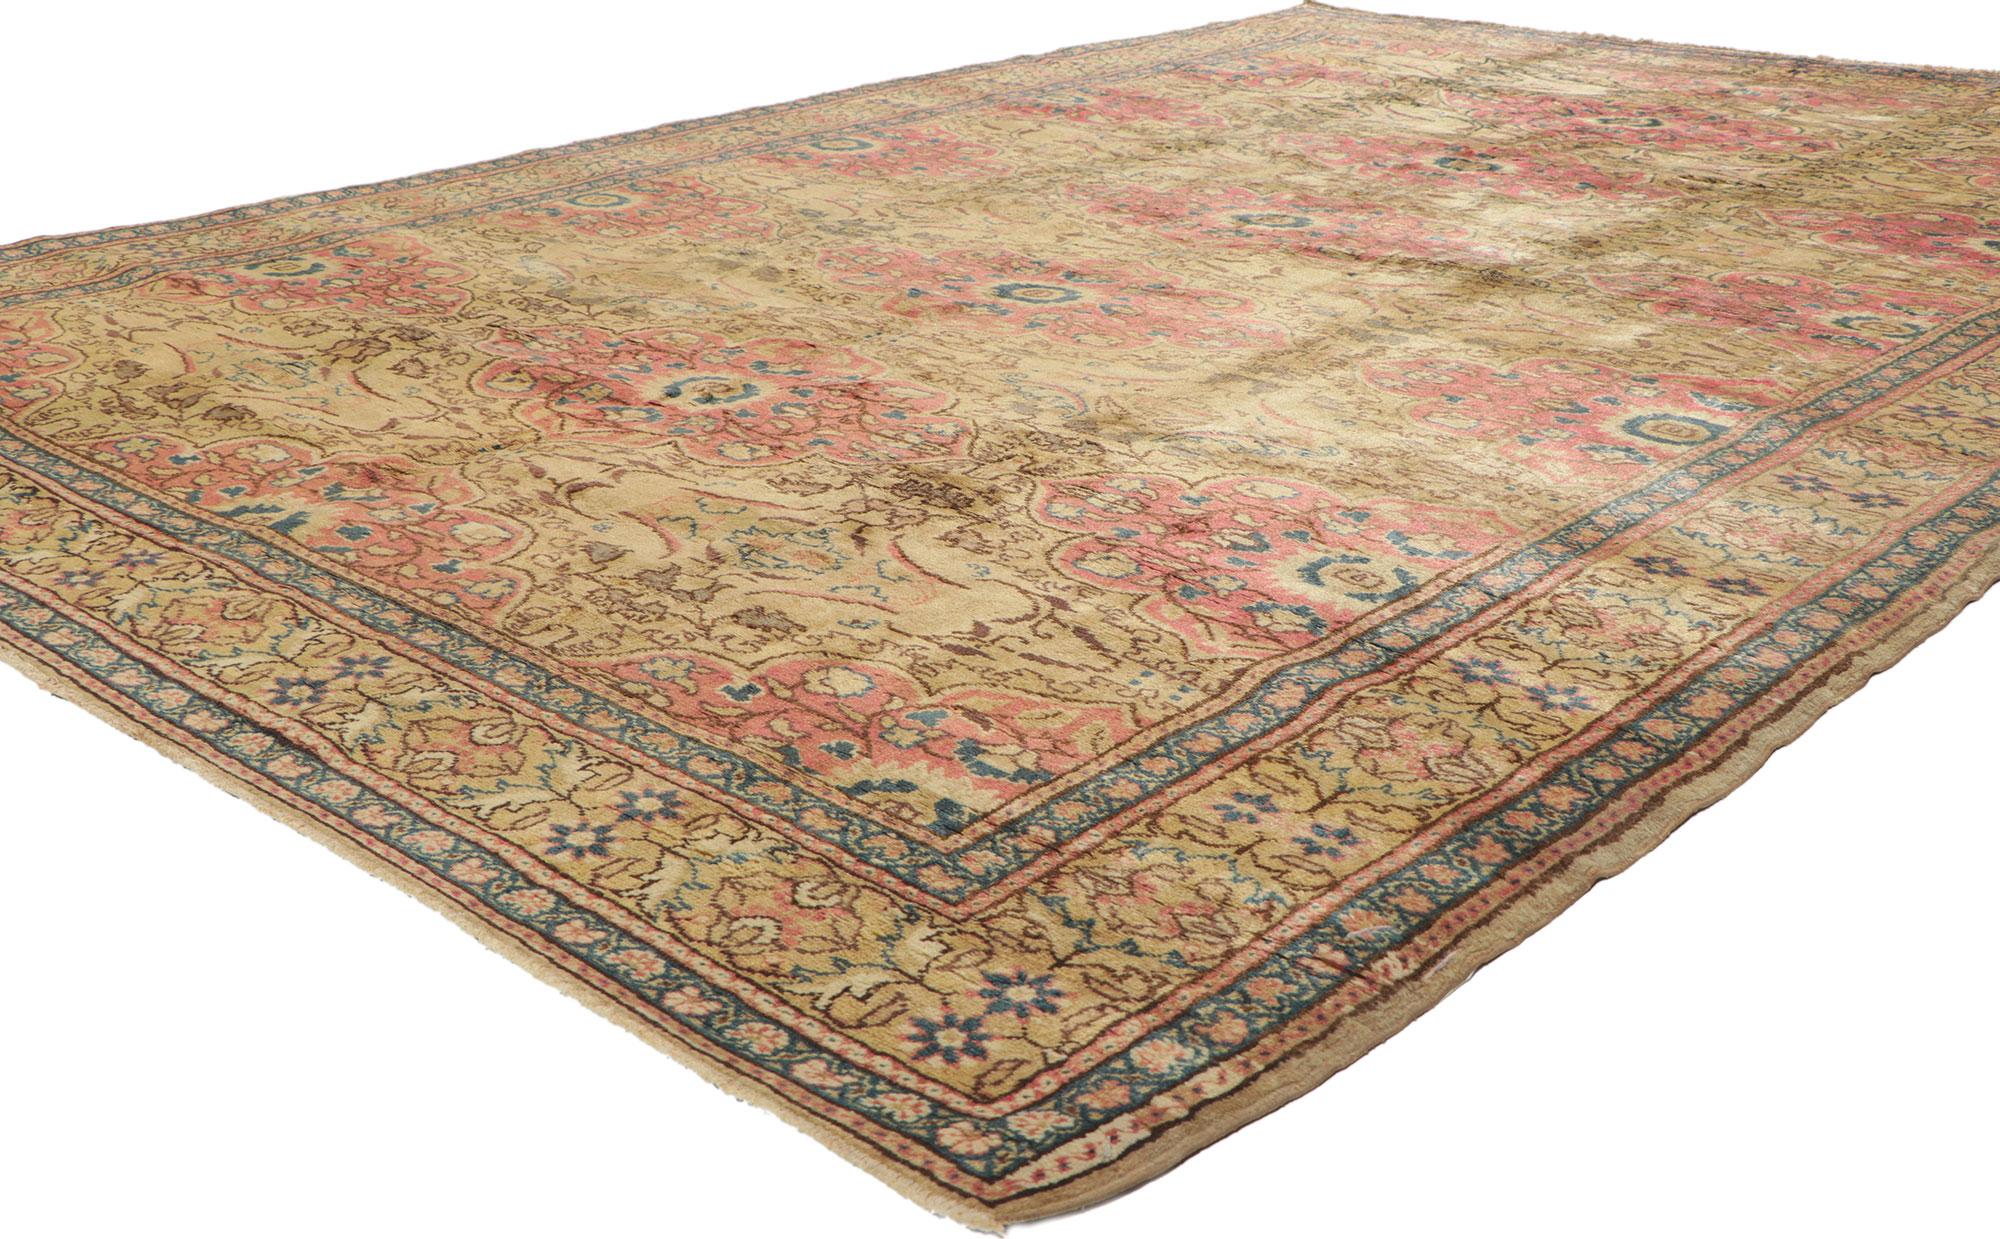 72724 Vintage Turkish Kayseri Rug, 06'08 x 09'08.

Artfully composed and harmoniously balanced, this hand-knotted wool vintage Turkish Kayseri rug captivates with its nostalgic beauty, revealing a timeless allure within its antique-washed